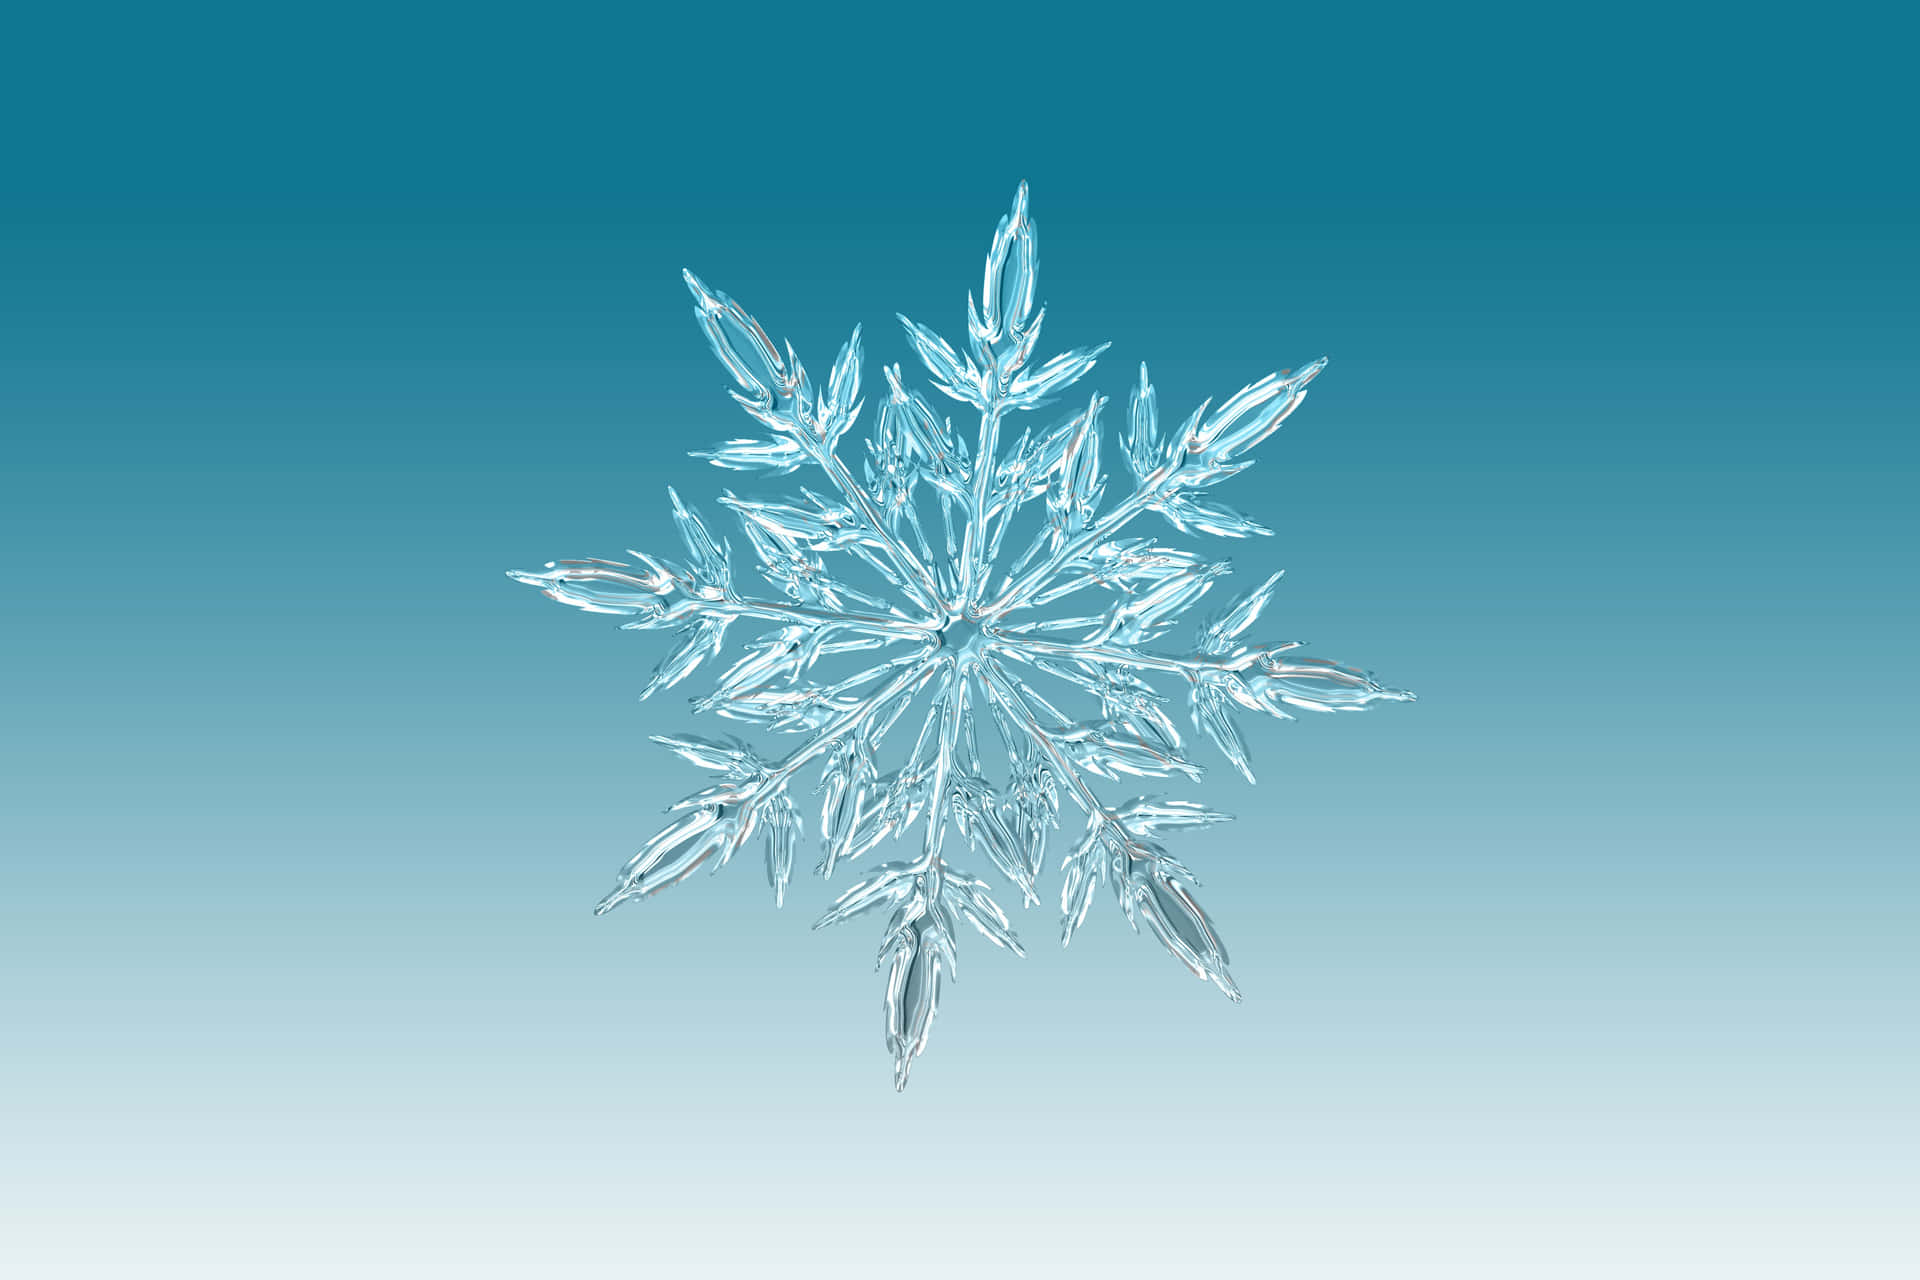 A snowflake's elegant design is captured in this beautiful wallpaper